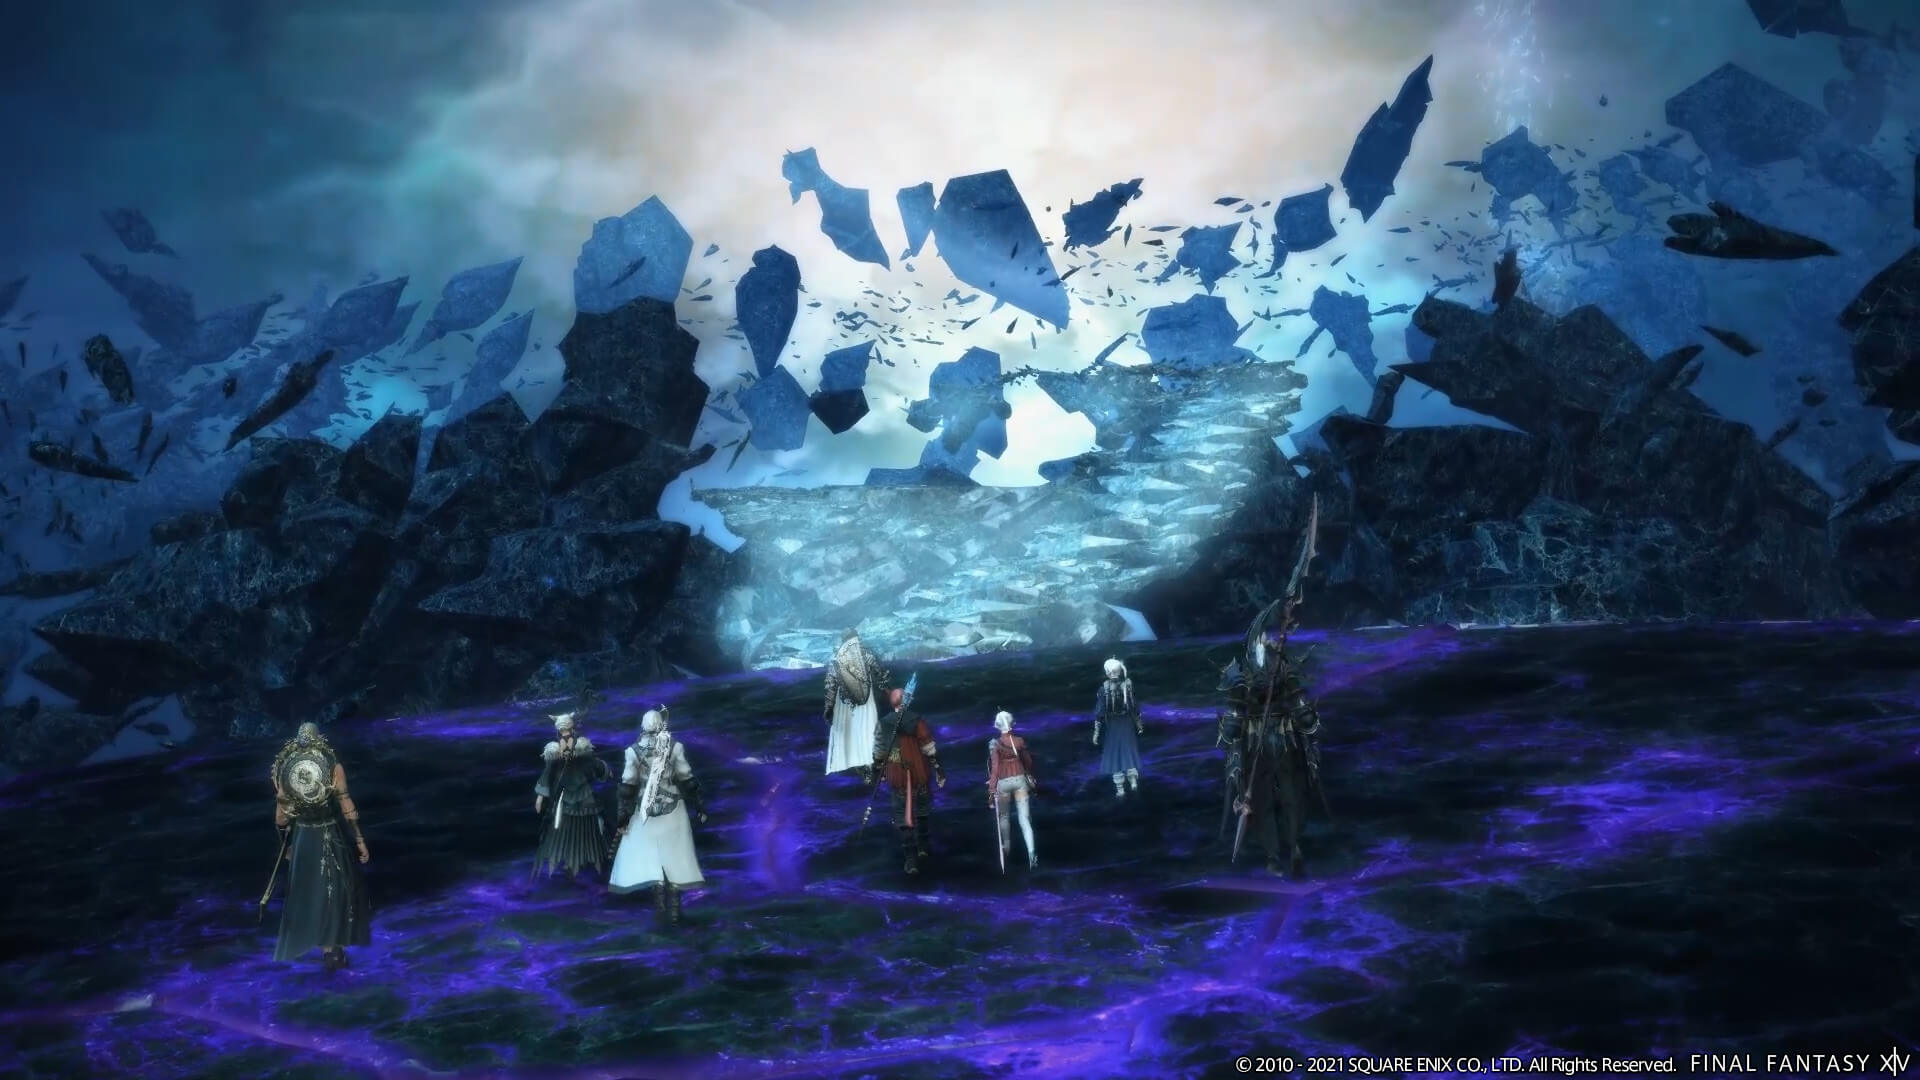 The Scions of the Seventh Dawn in Square Enix's Final Fantasy XIV: Endwalker